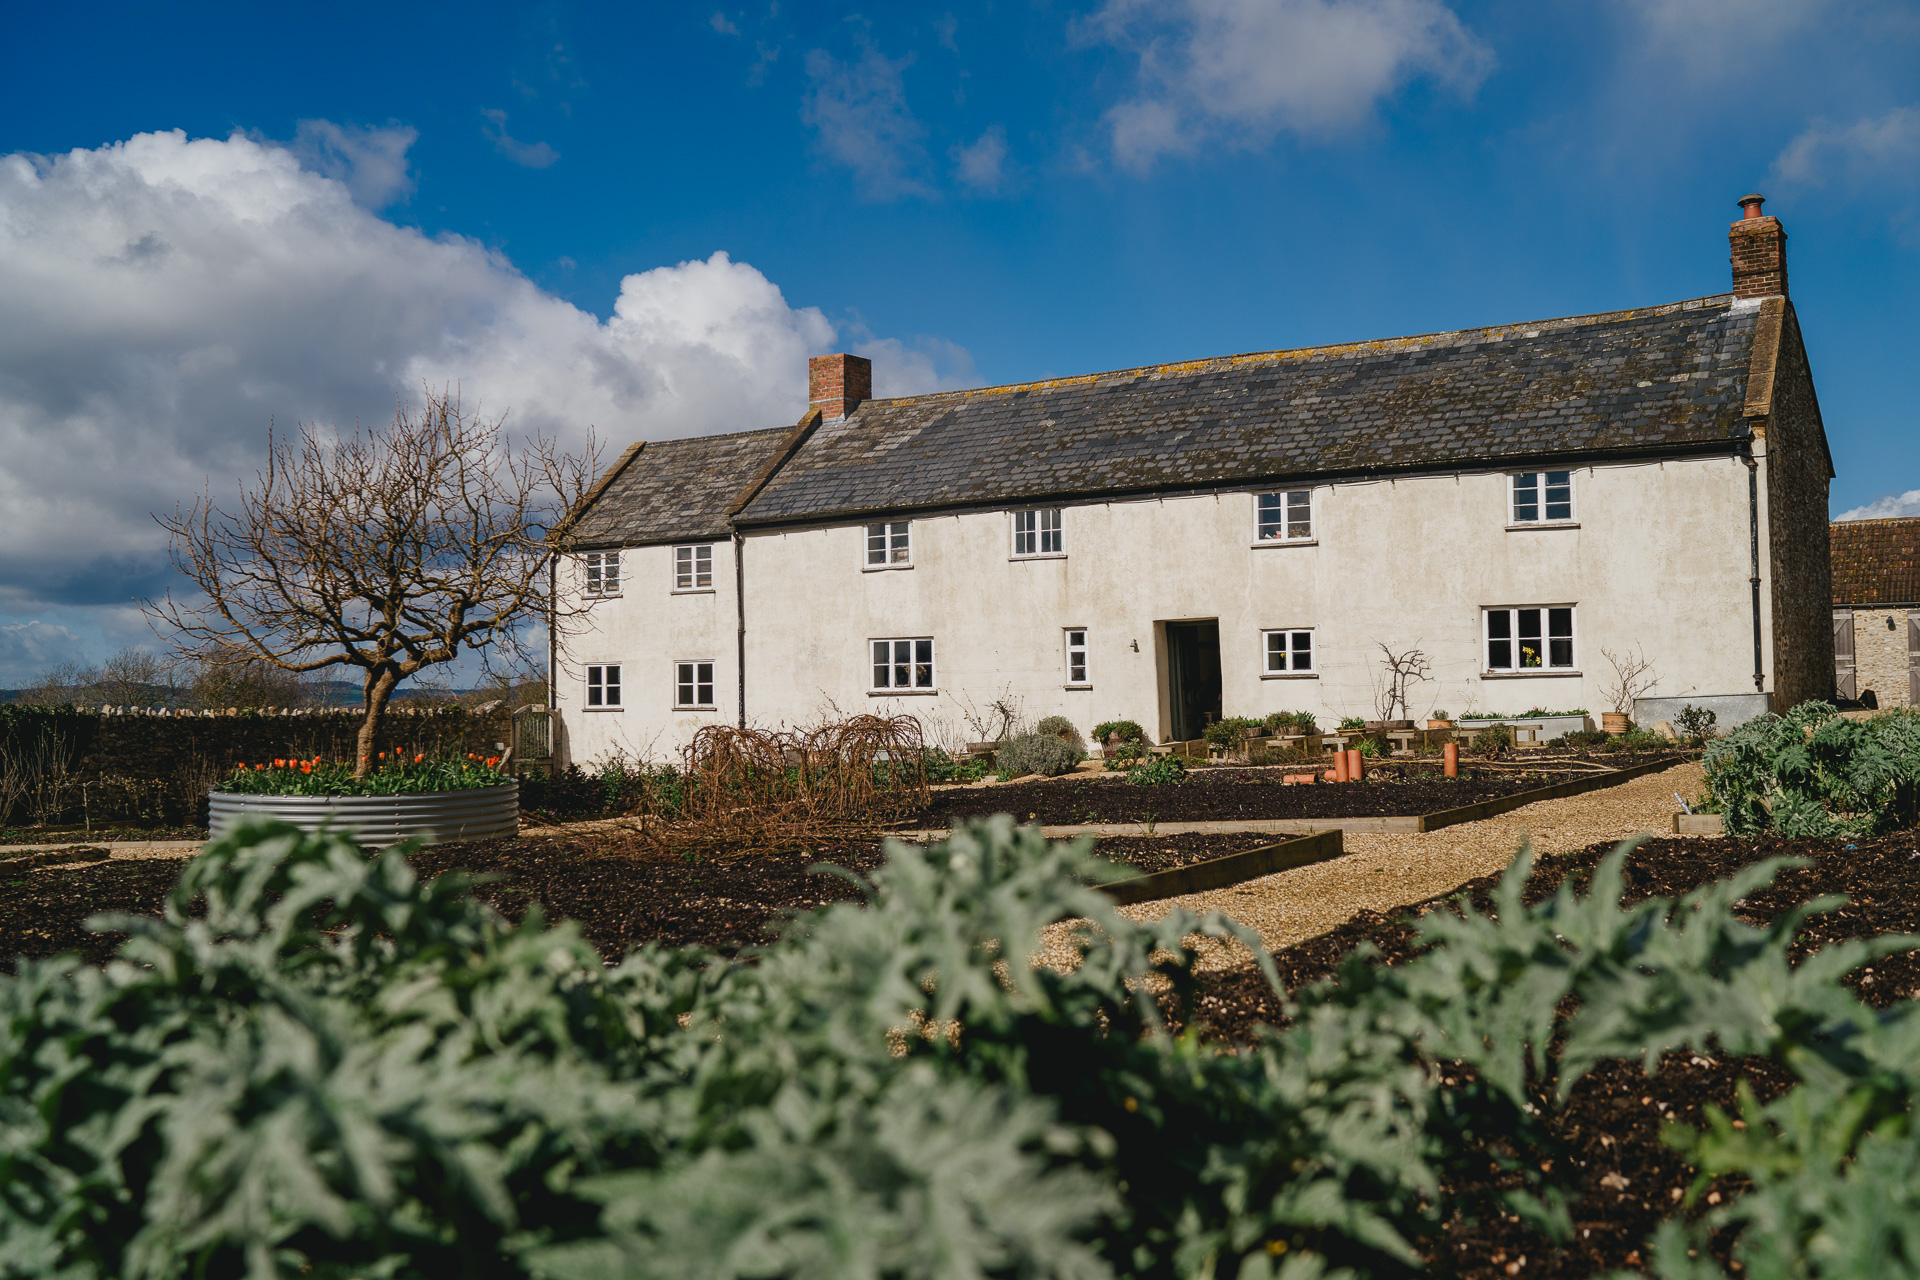 River Cottage and the kitchen garden